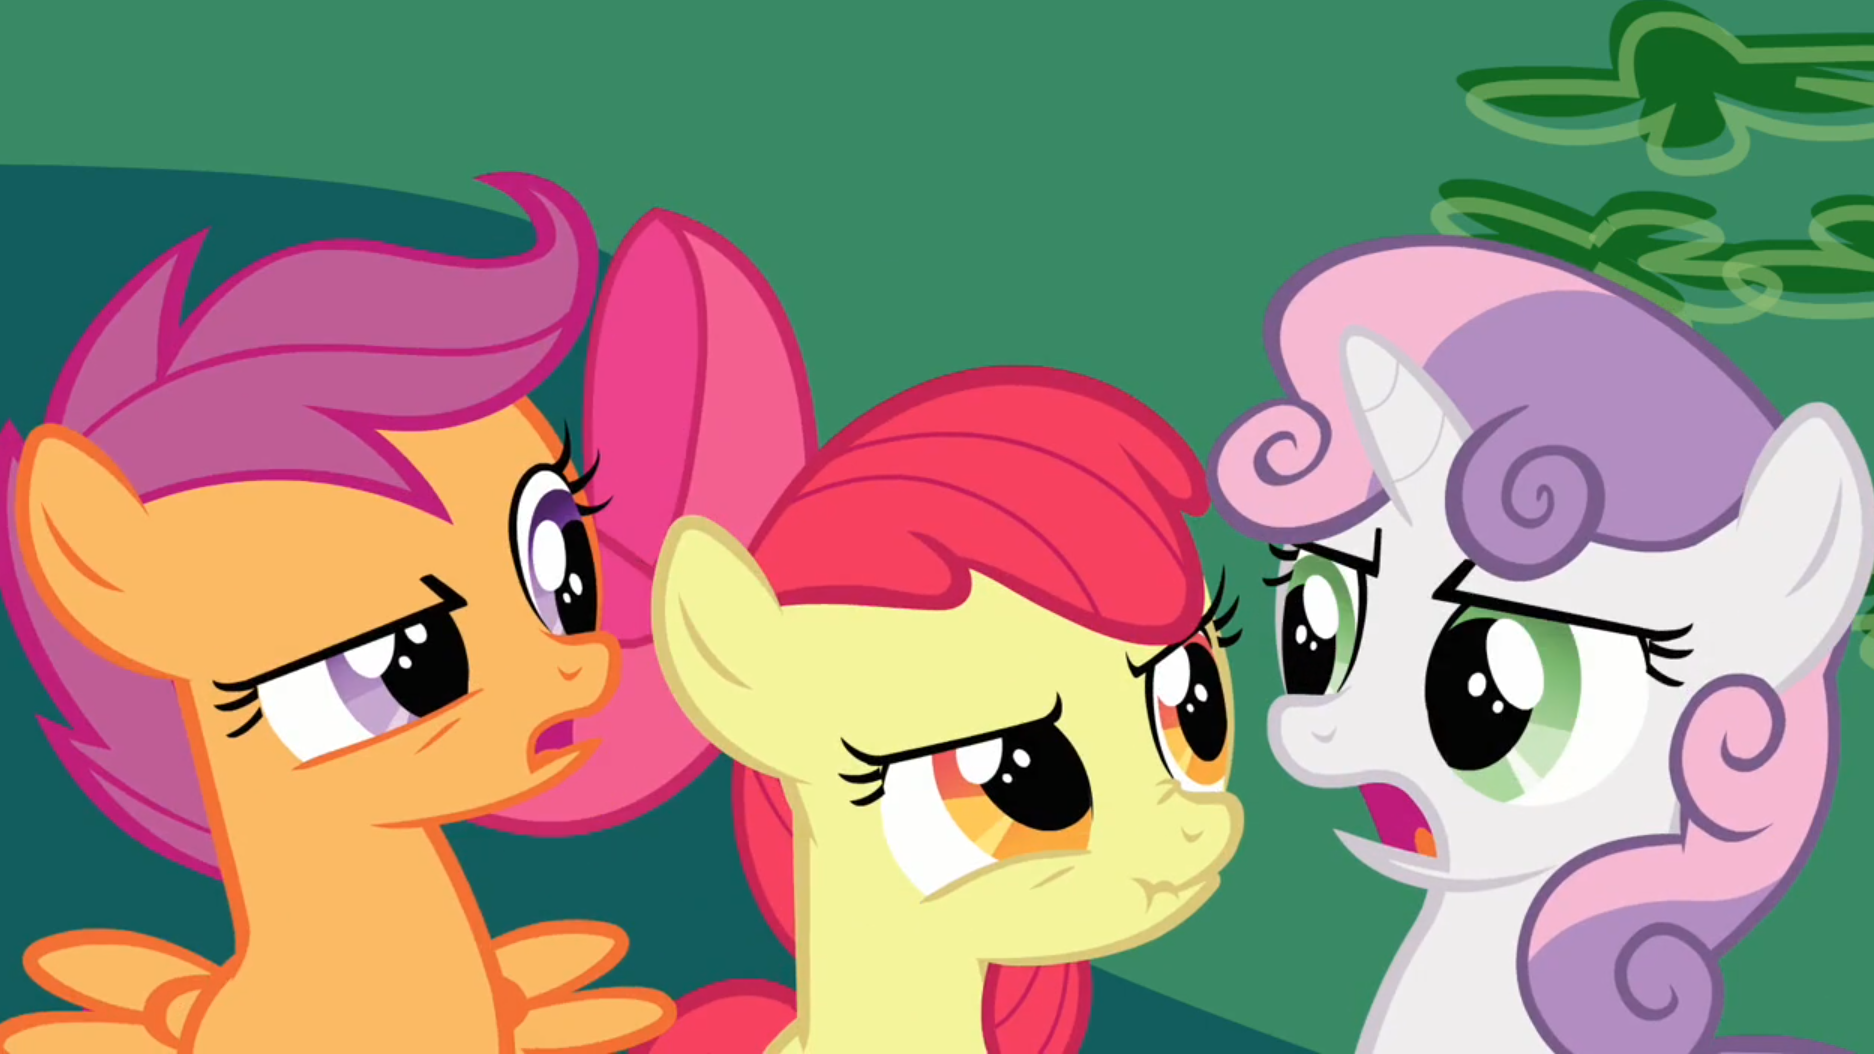 1516925__safe_screencap_apple+bloom_scootaloo_sweetie+belle_cutie+mark+crusaders_hearts+and+hooves+day_scrunchy+face.png